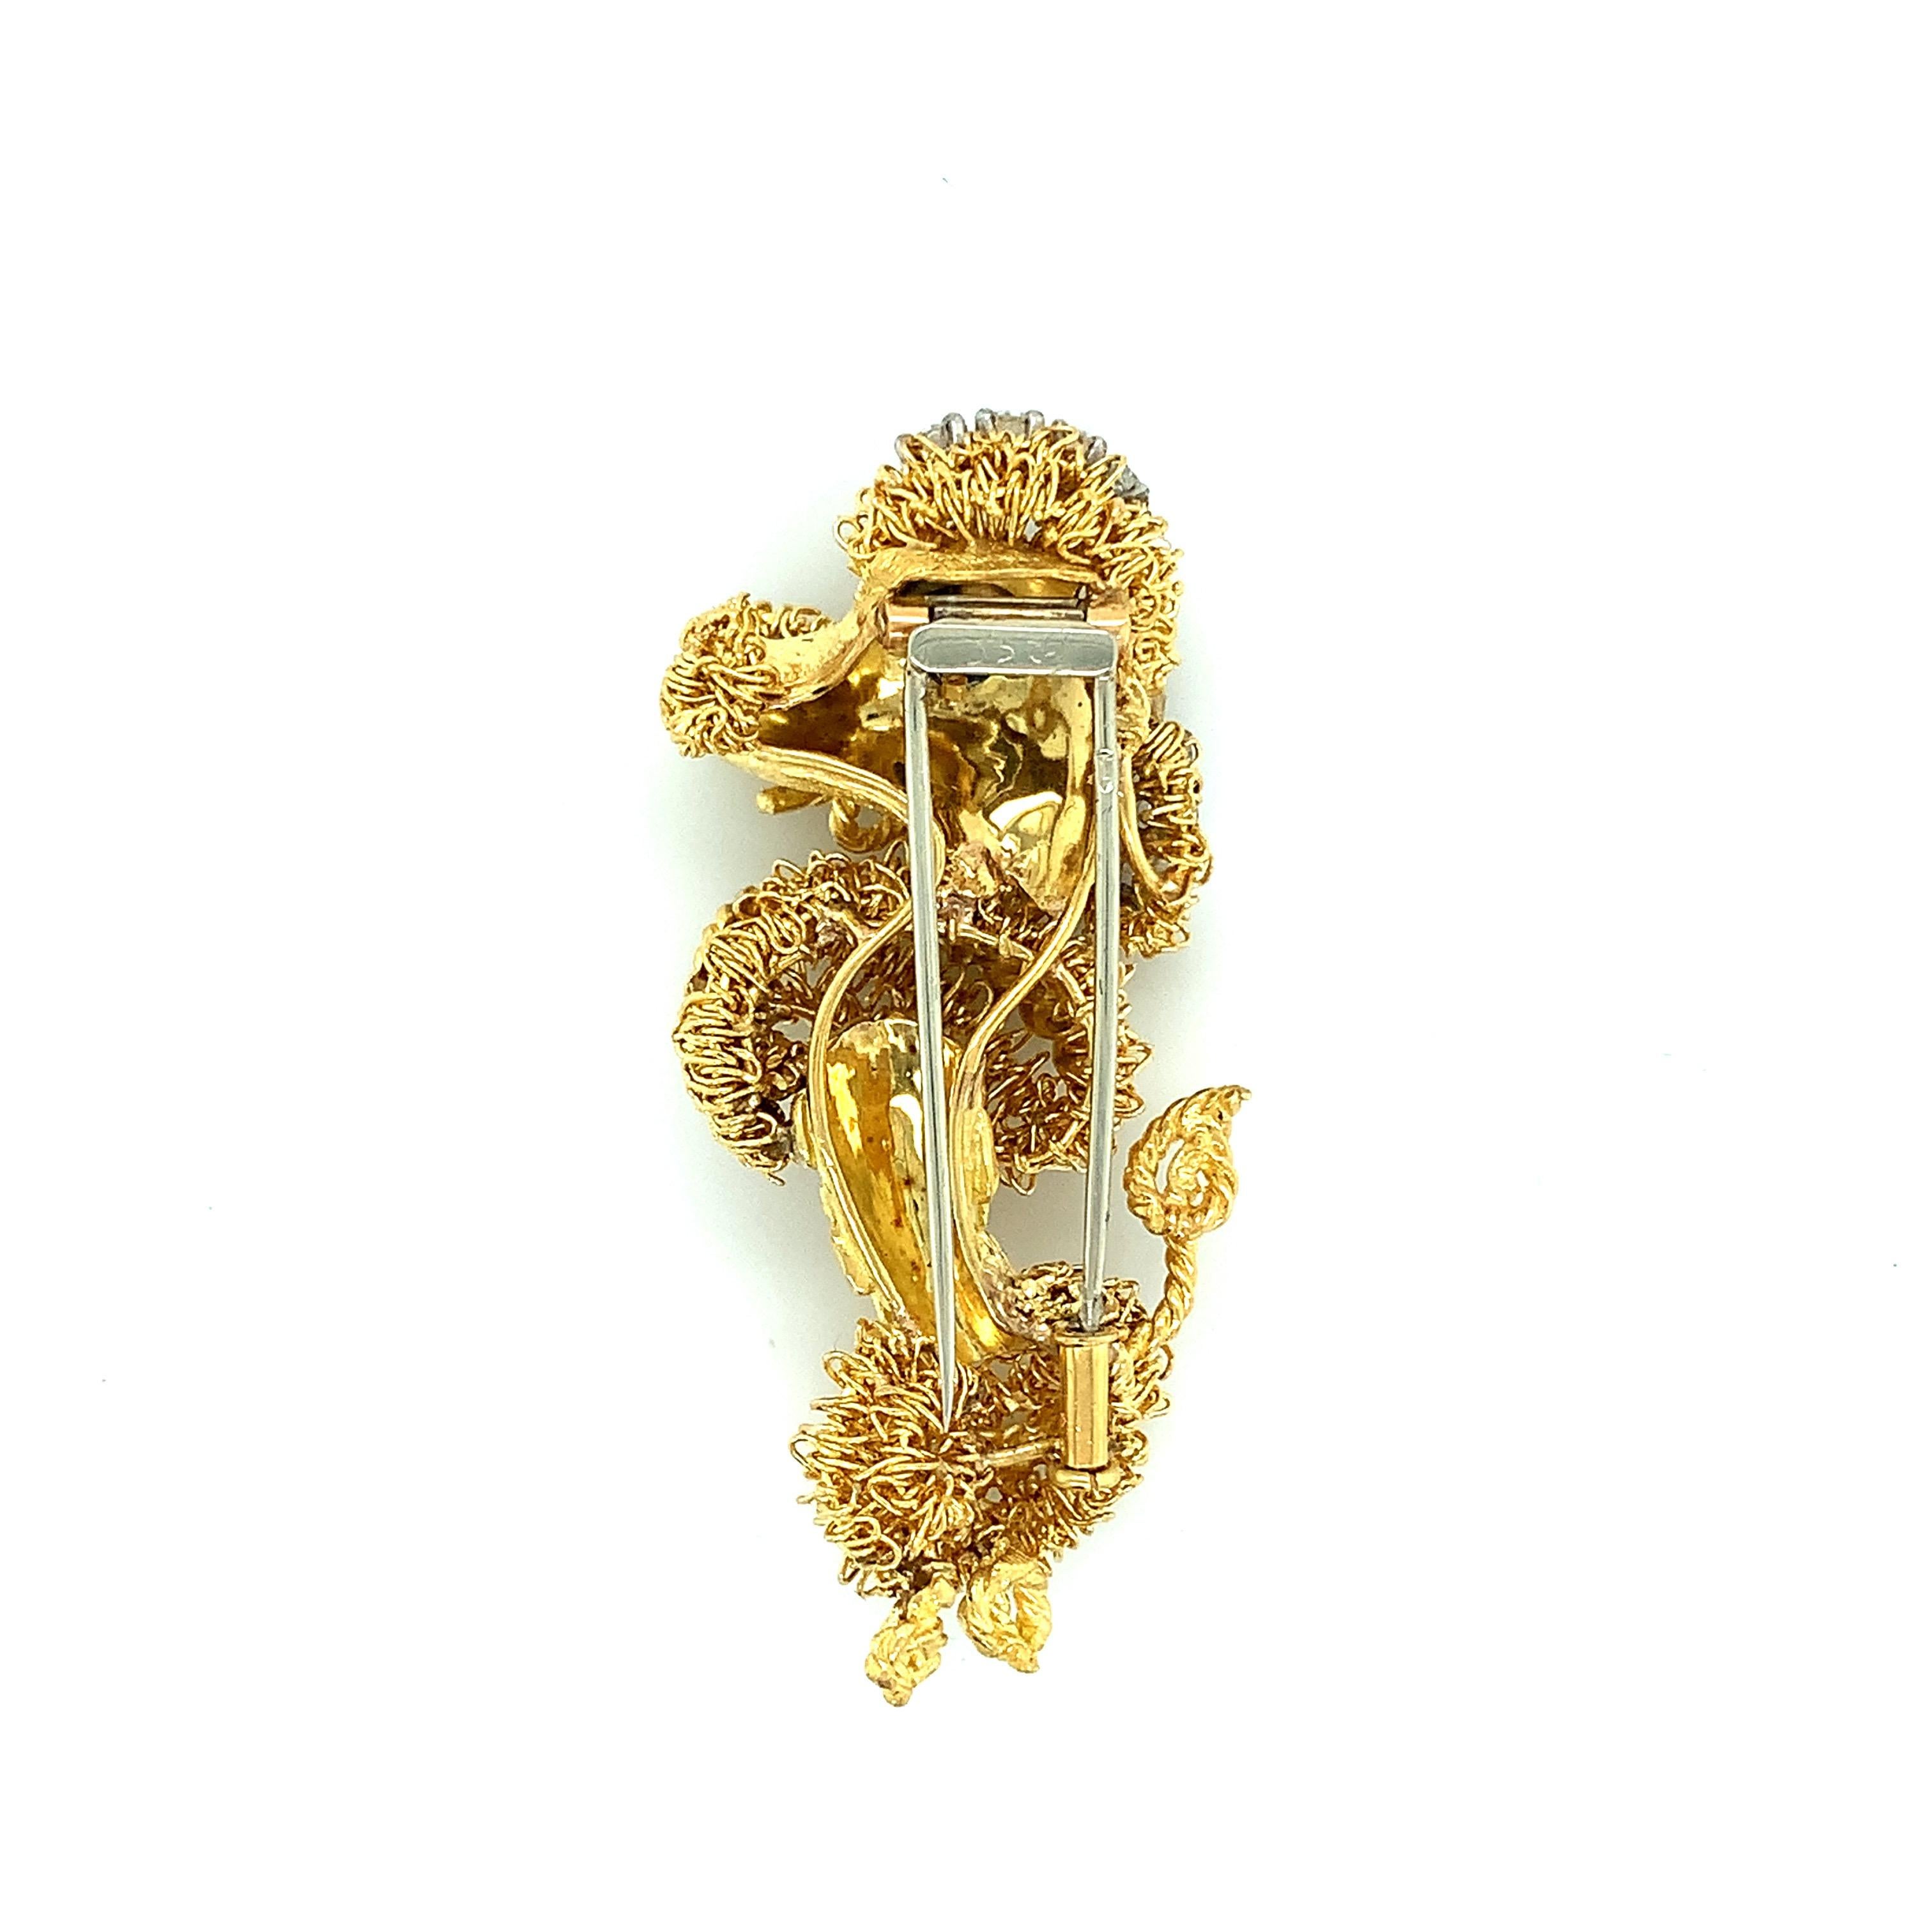 A poodle brooch made out of 18 karat yellow gold and white gold, featuring diamonds weighing approximately 0.50 carat. Circa 1970s. Total weight: 20.7 grams. Width: 1 inch. Length: 2 inches.